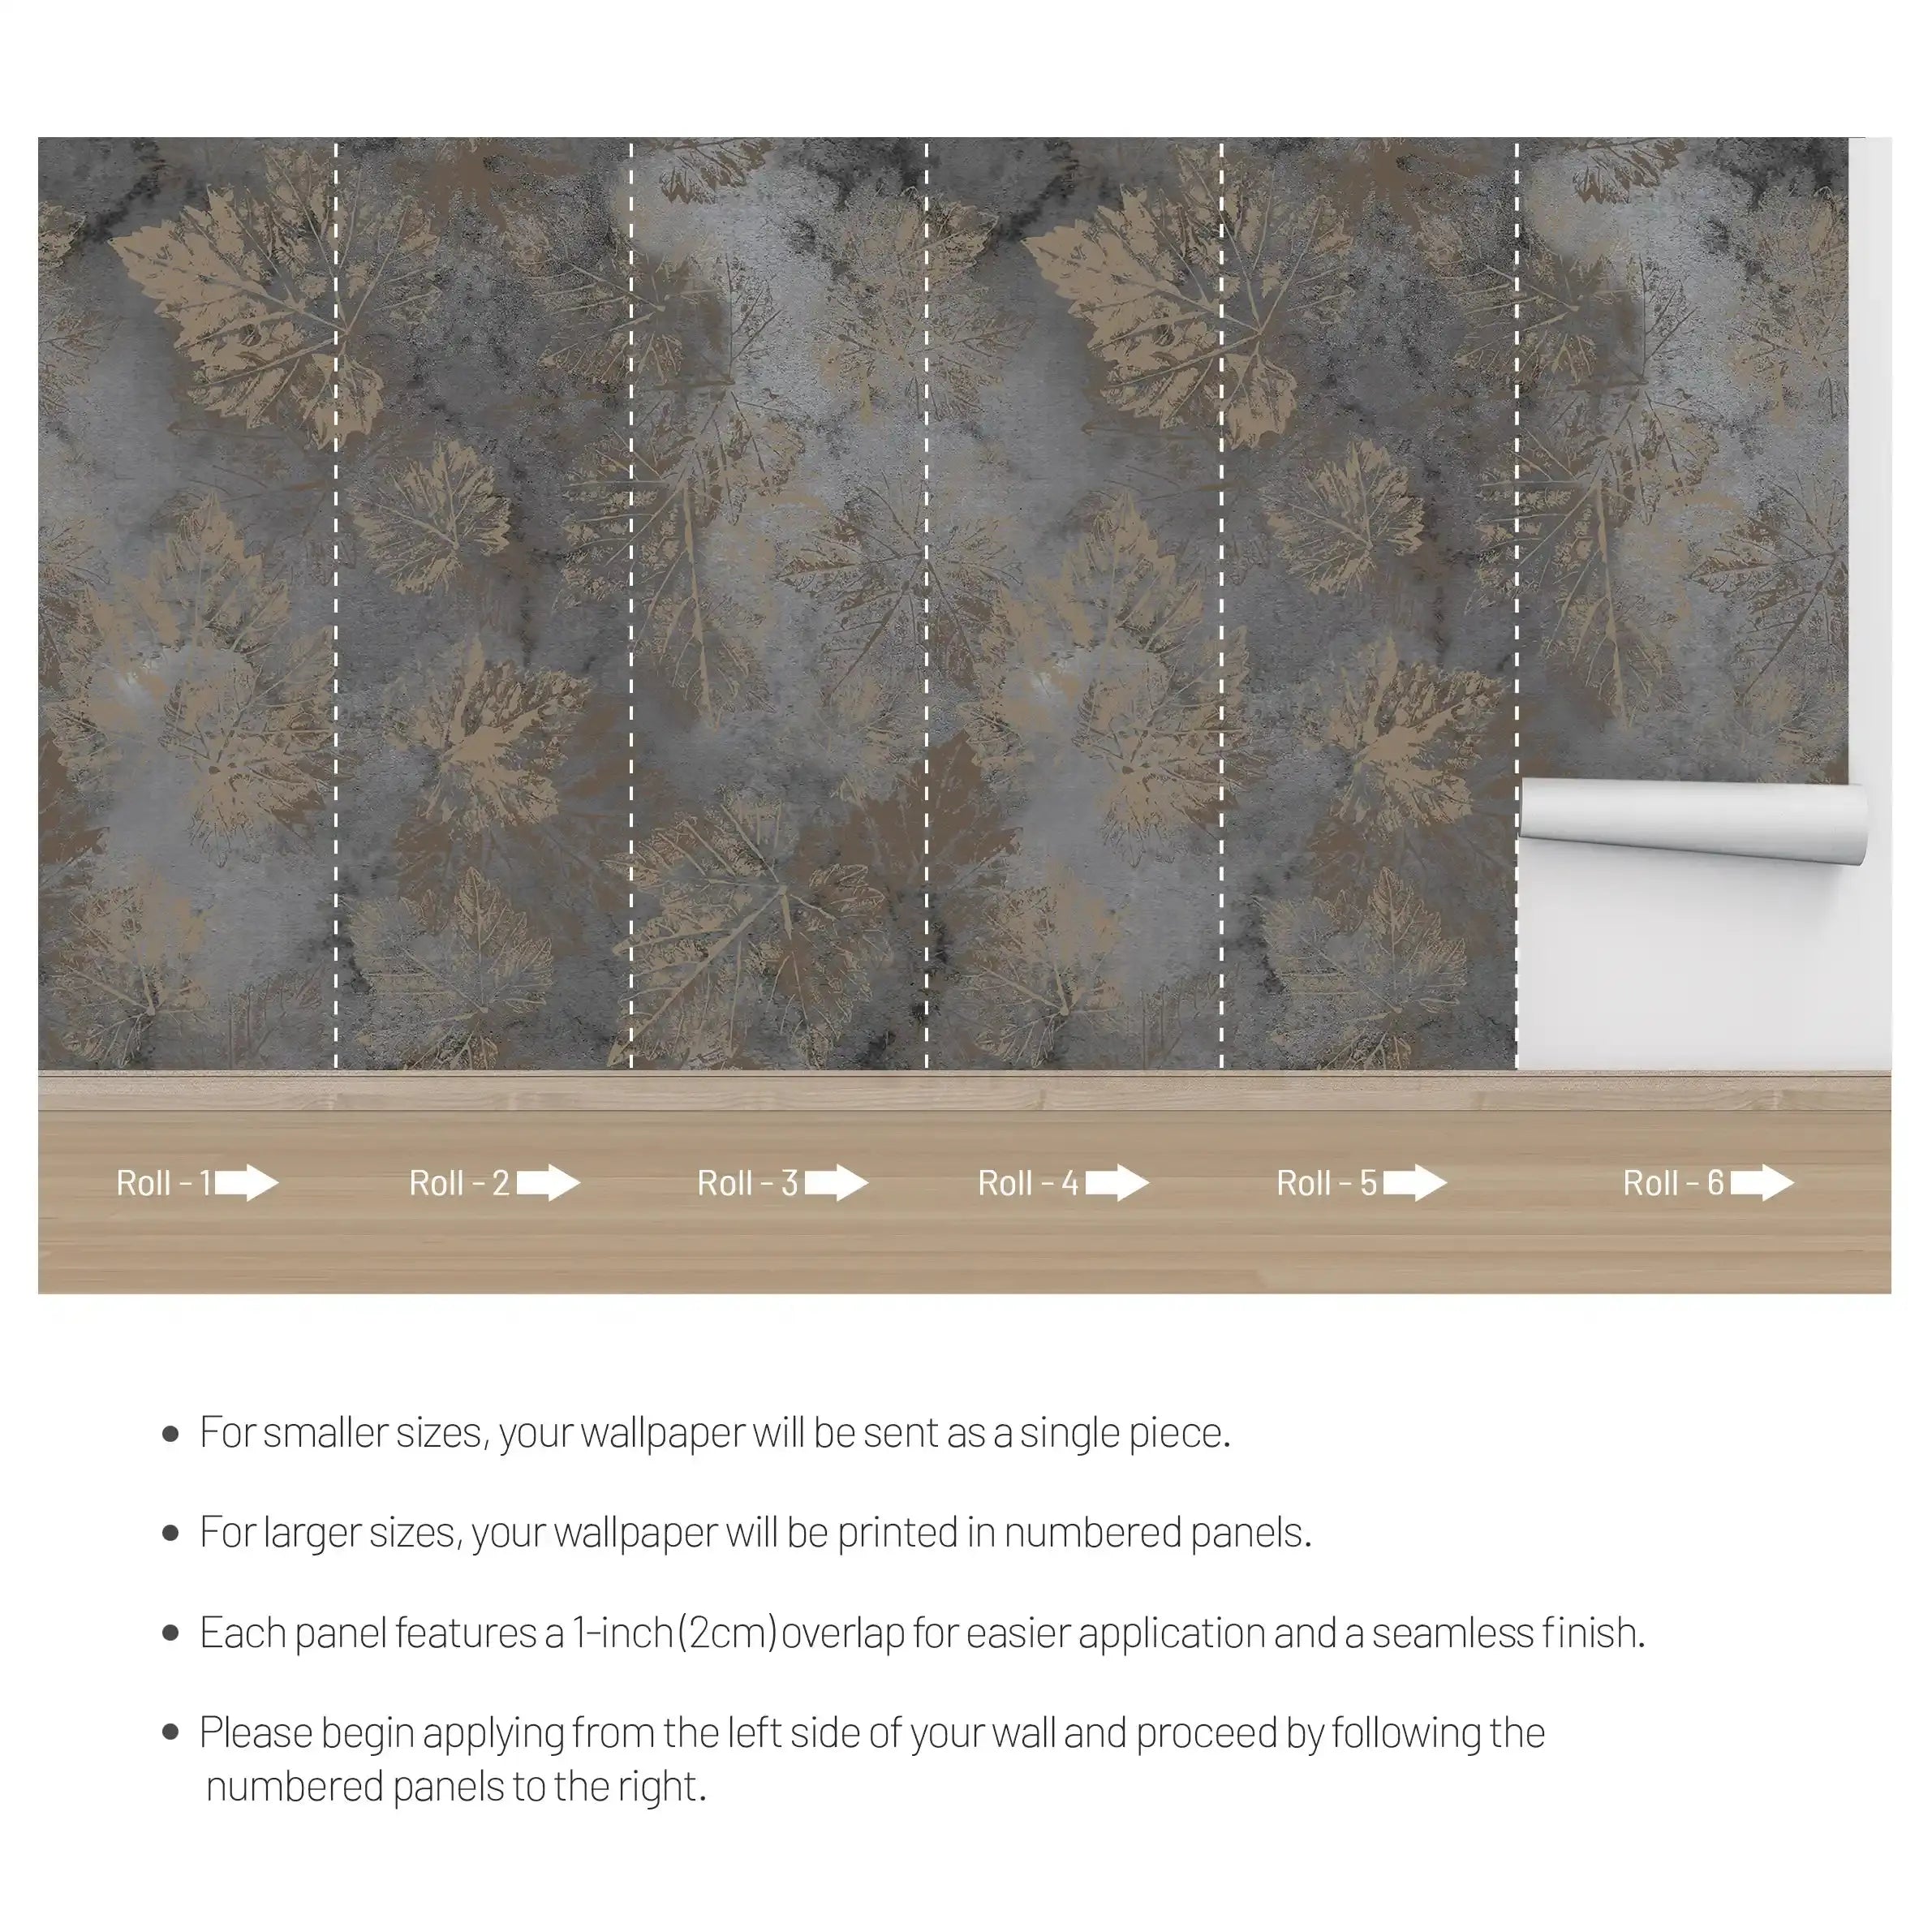 3072-E / Vintage Floral Mural Peel and Stick Wallpaper - Brown Nature-Inspired Wall Decor for Modern Homes - Artevella